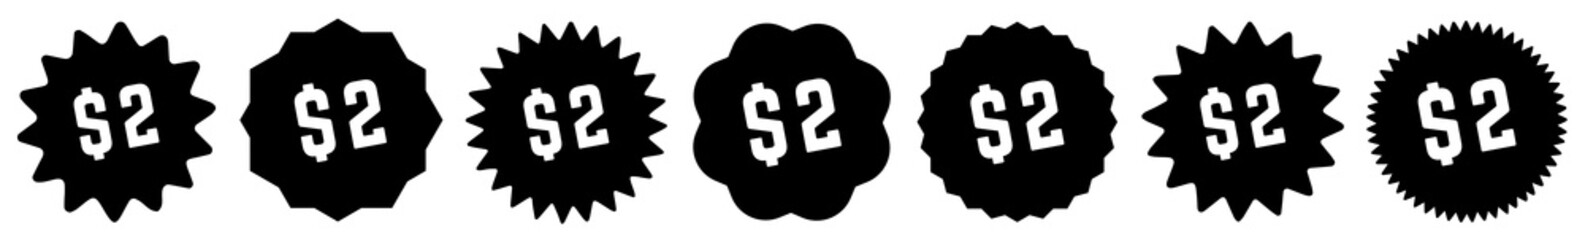 Wall Mural - 2 Price Tag Black | 2 Dollar | Special Offer Icon | Sale Sticker | Deal Label | Variations